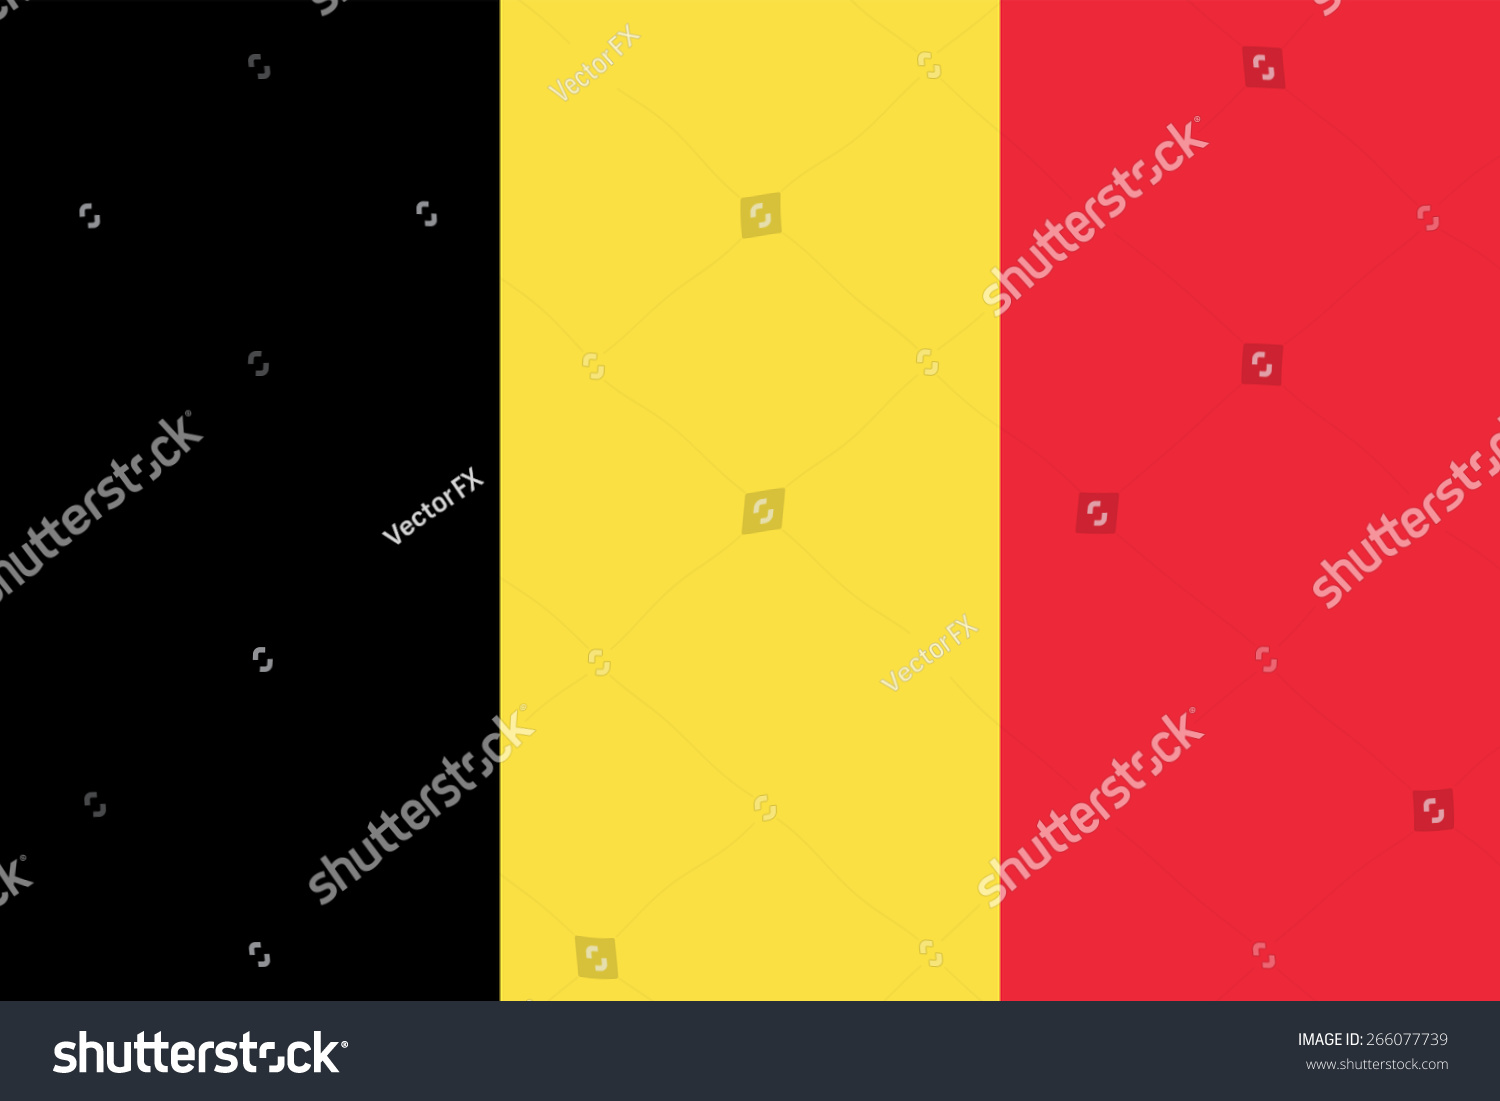 Belgian flag. State government symbol of the country. True proportions and colors. Consists of three vertical stripes - black, yellow and red. Can be used to refer Belgium in design and maps. #266077739